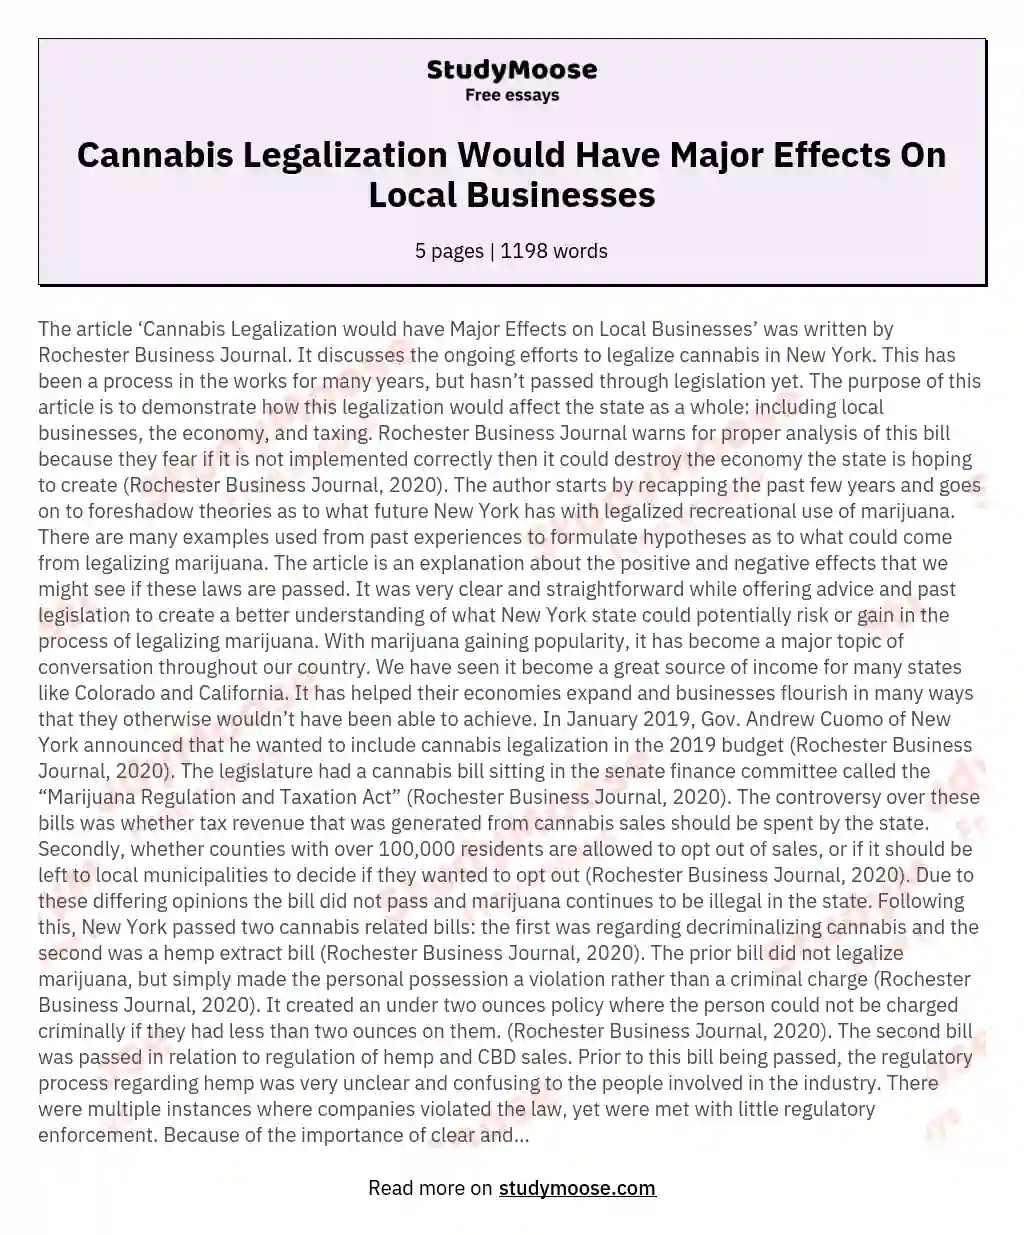 Cannabis Legalization Would Have Major Effects On Local Businesses essay